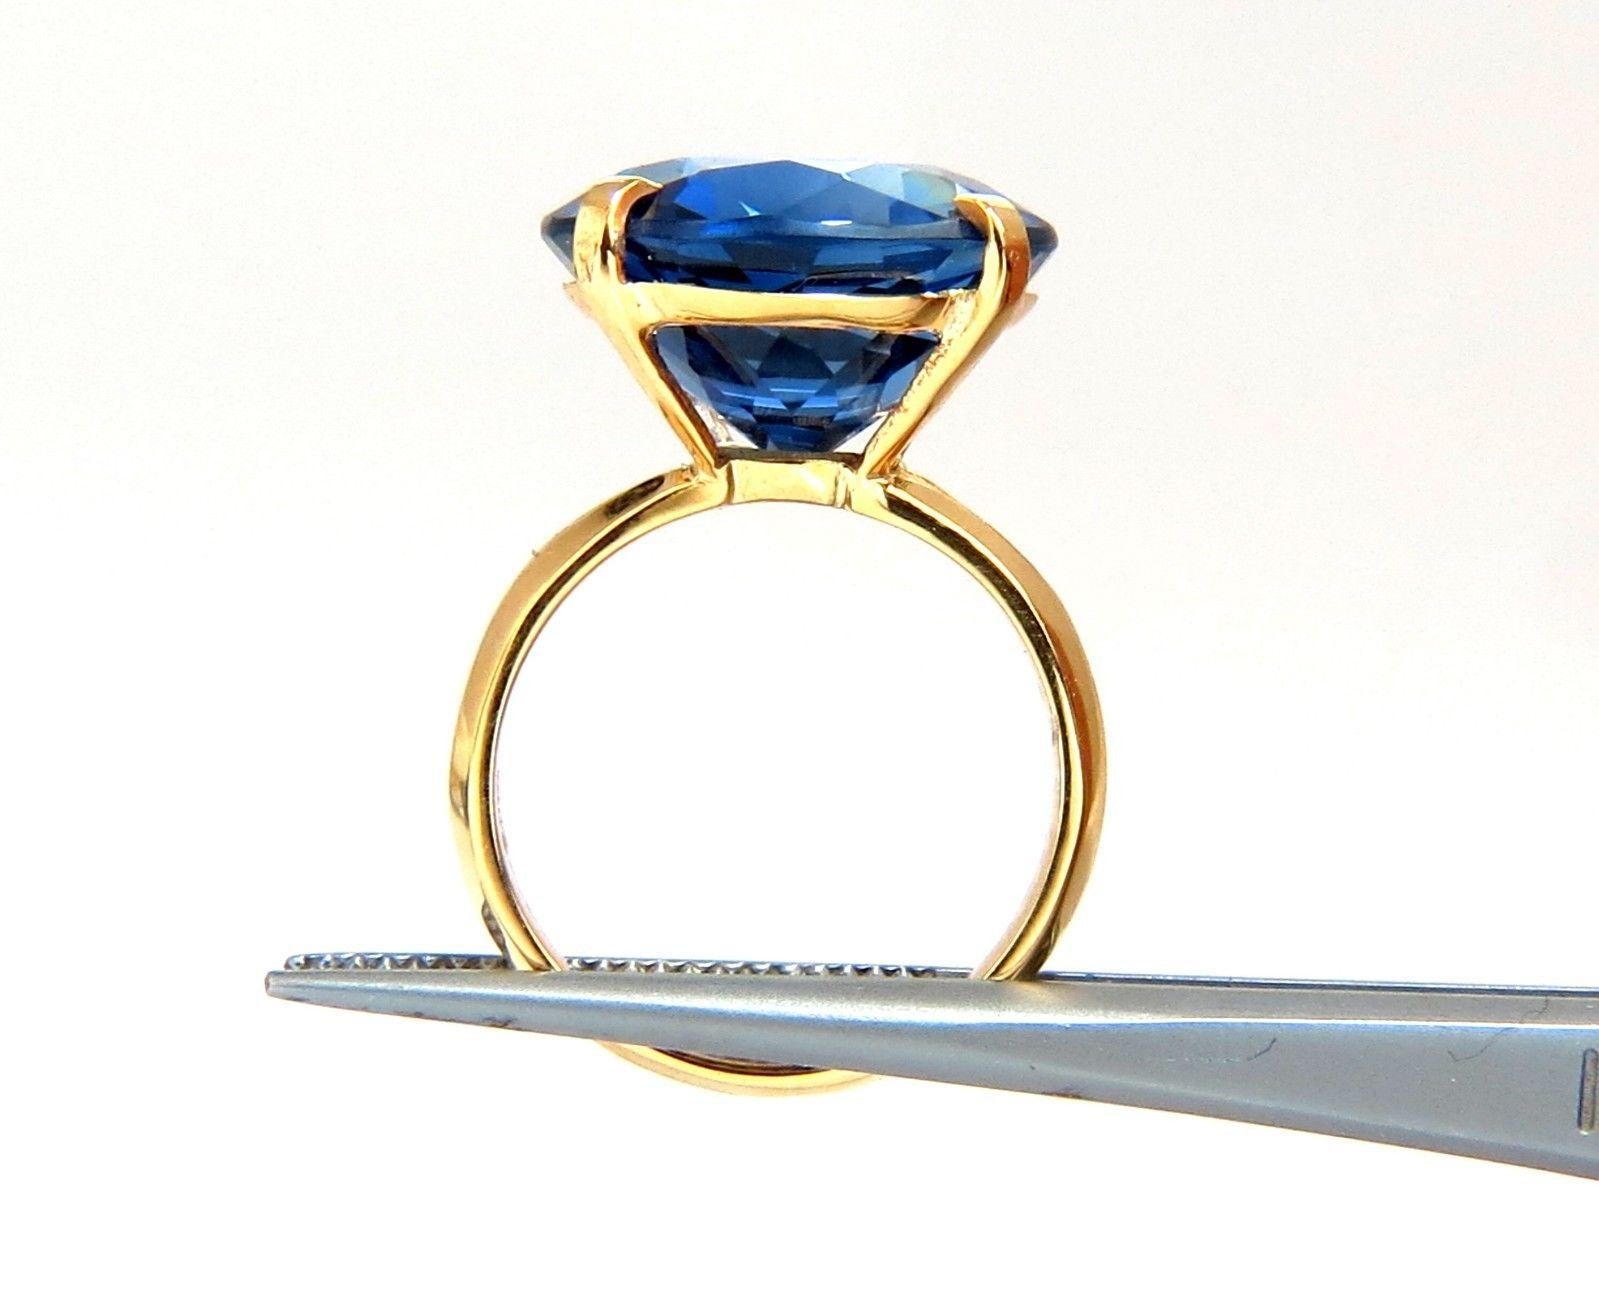 5.70ct. Synthetic  Sapphire ring.
Full cut brilliant Round cut

 Clean clarity 

Transparent and vibrant top Bright Gem Kashmir Blue Color

15mm

Lab Grown.

14kt. white gold 

6 Grams

Depth of ring: 10mm 

Band thickness: 2.7mm

Current ring size: